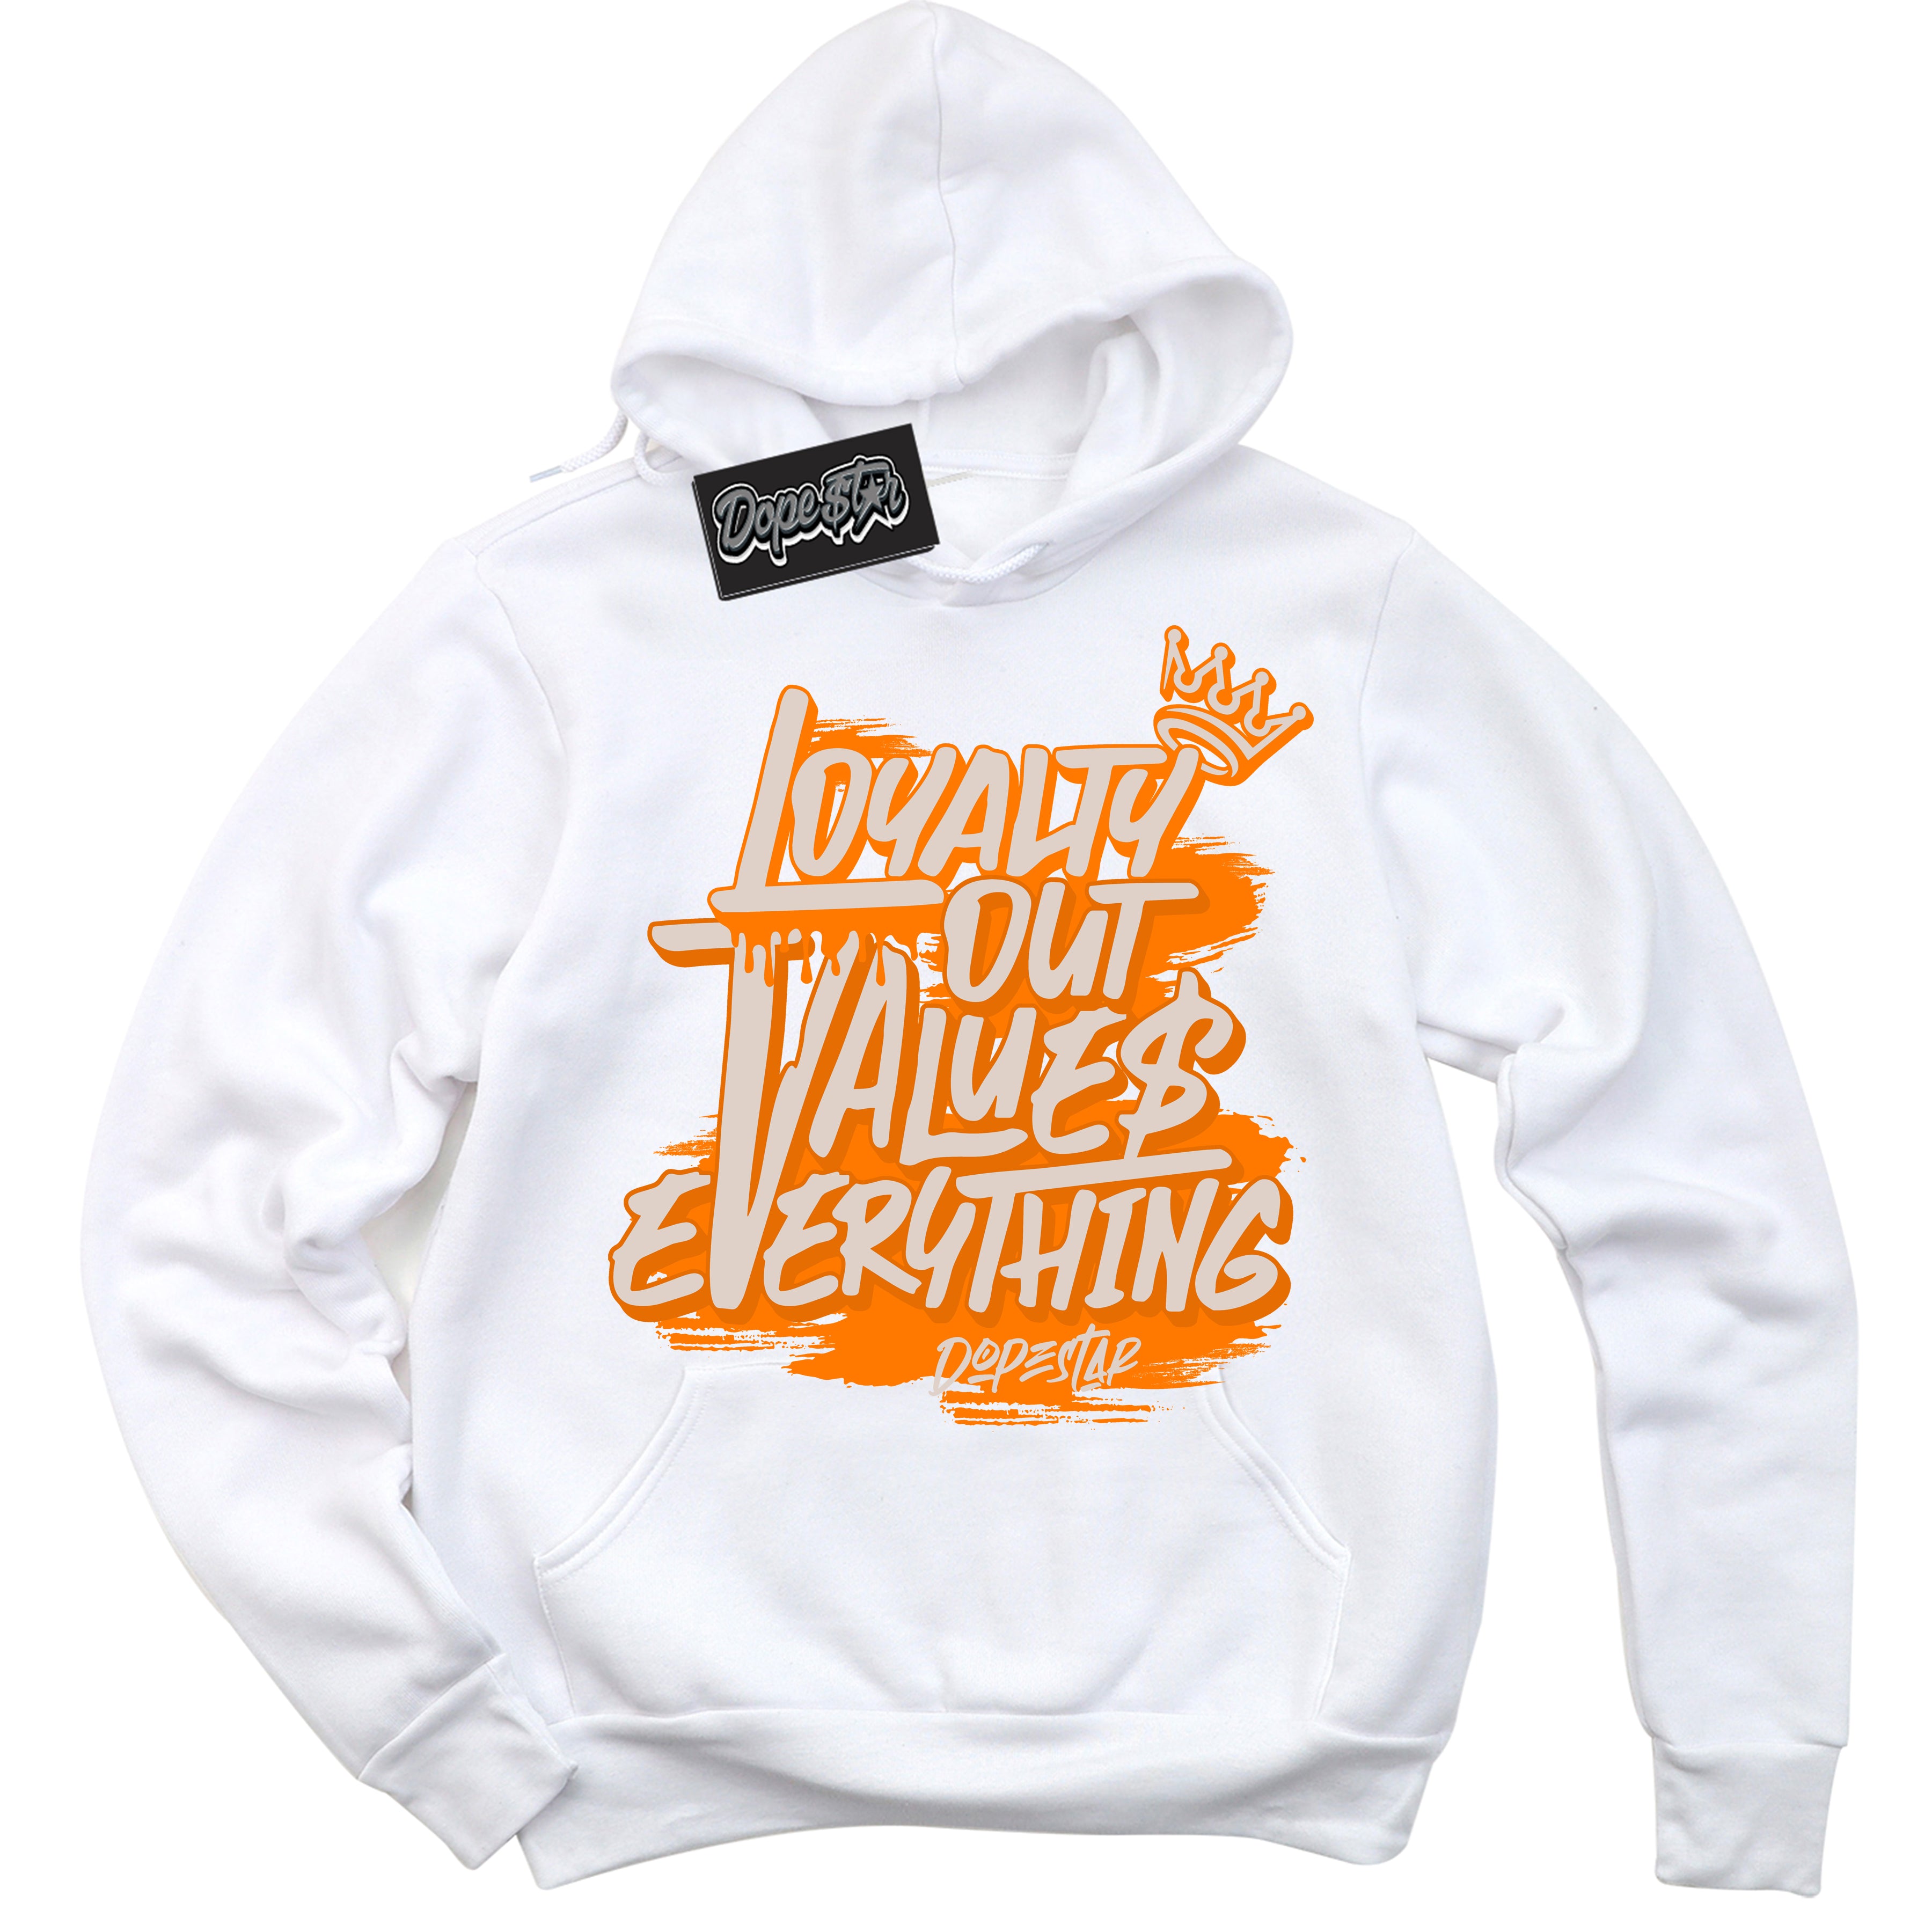 Cool White Hoodie with “ Loyalty Out Values Everything ”  design that Perfectly Matches Peach Cream Sneakers.